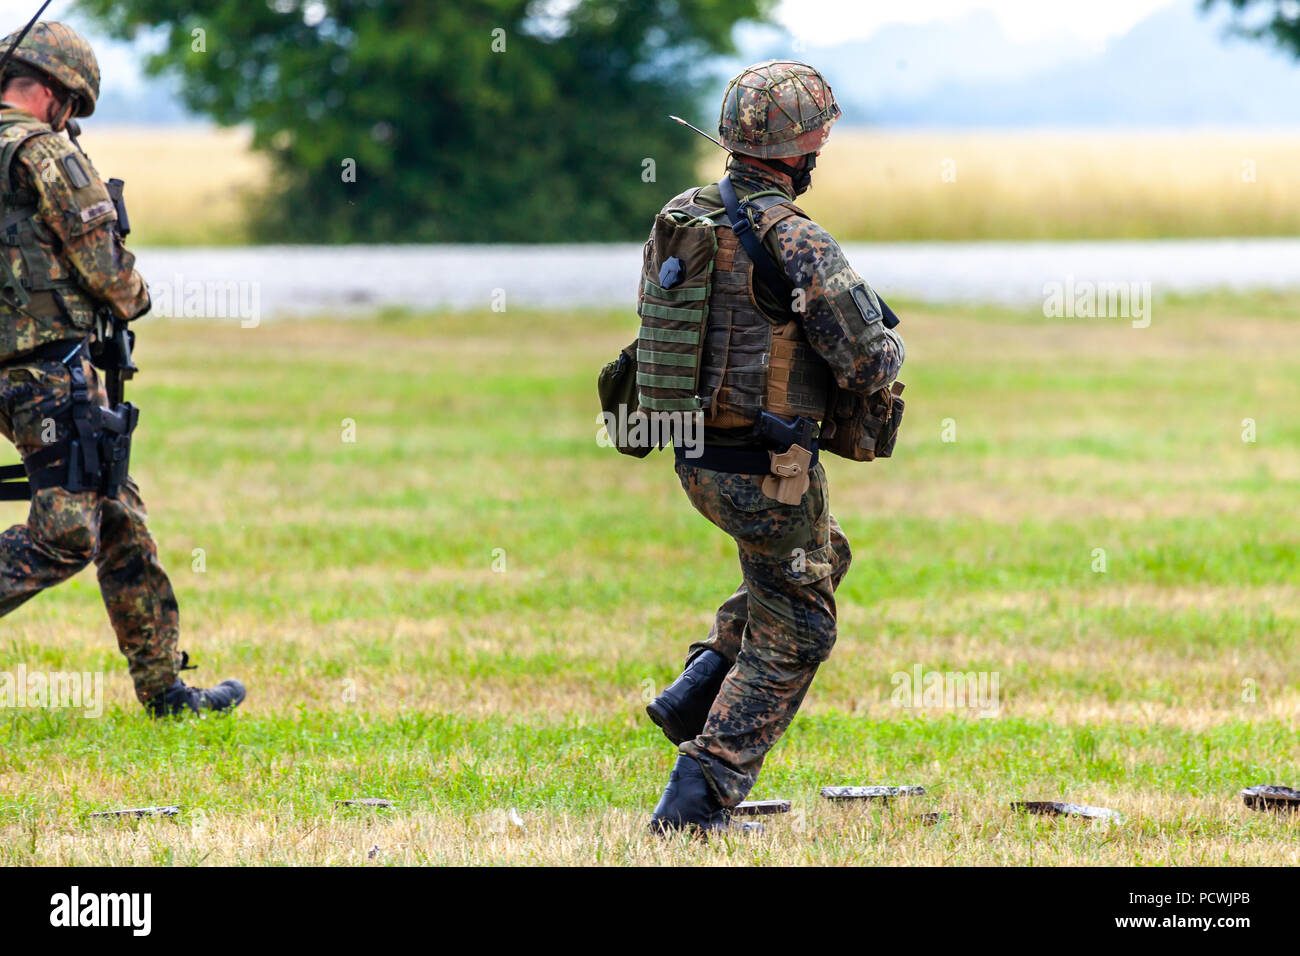 FELDKIRCHEN / GERMANY - JUNE 9, 2018: German soldier on an exercise at open day on day of the Bundeswehr in Feldkirchen Stock Photo